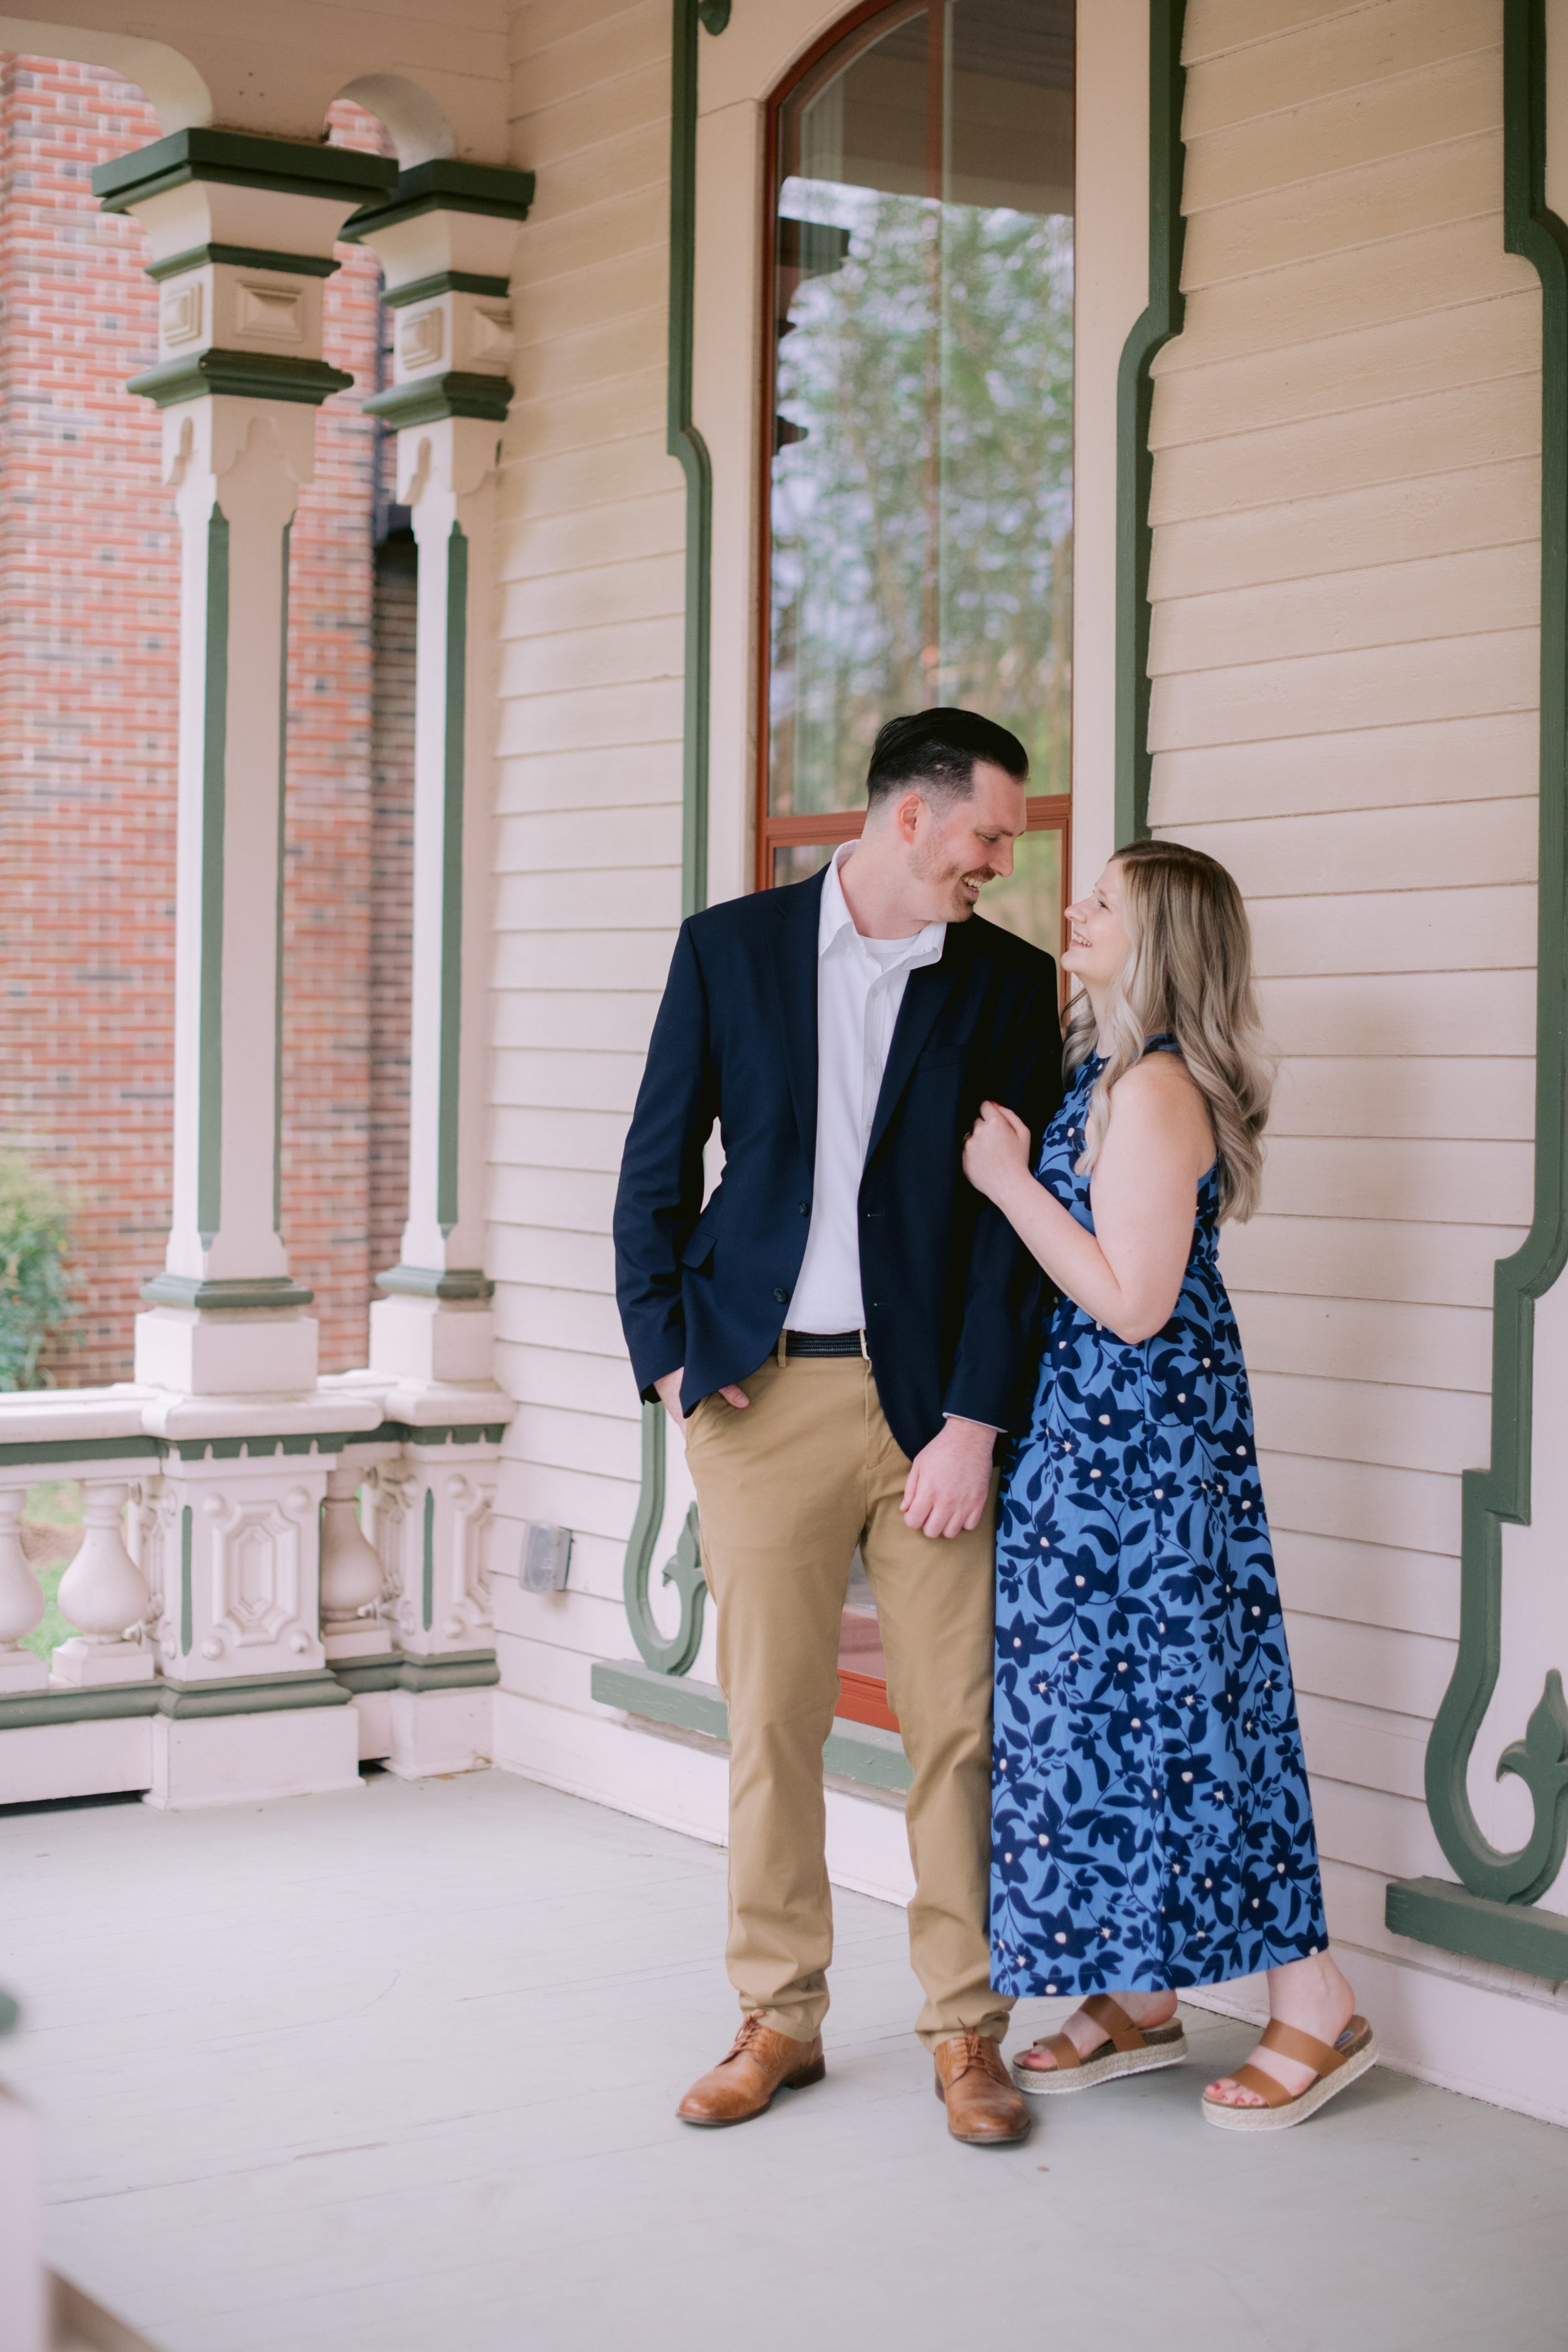 Victoria and Cody Front Porch Pose Downtown Raleigh NC Engagement Photos in Historic Oakwood Neighborhood Fancy This Photography